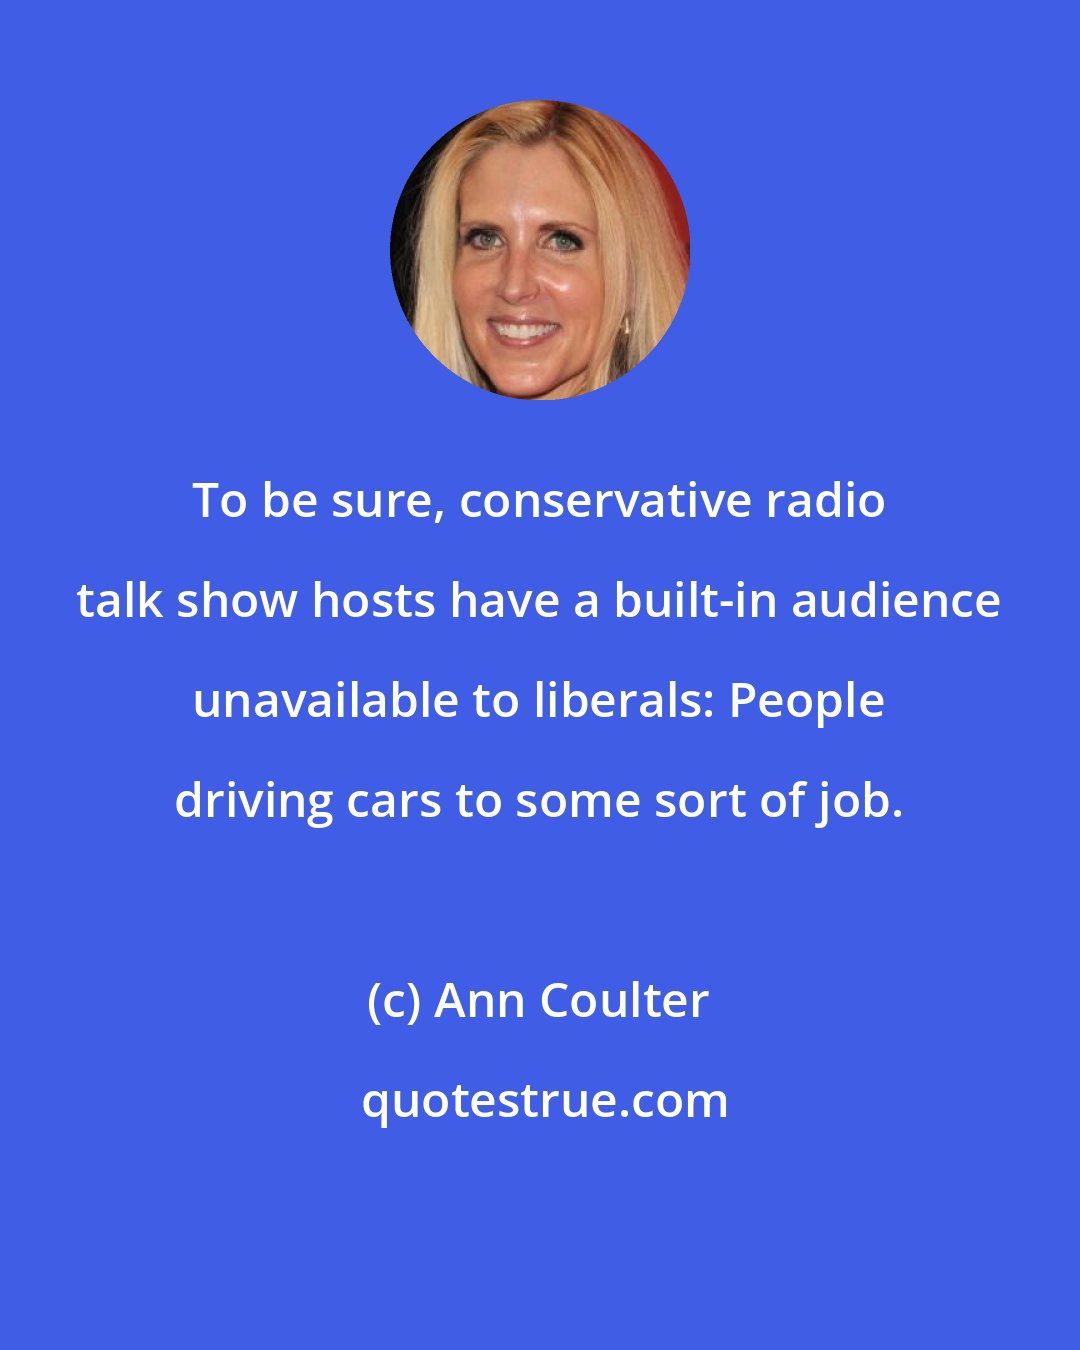 Ann Coulter: To be sure, conservative radio talk show hosts have a built-in audience unavailable to liberals: People driving cars to some sort of job.